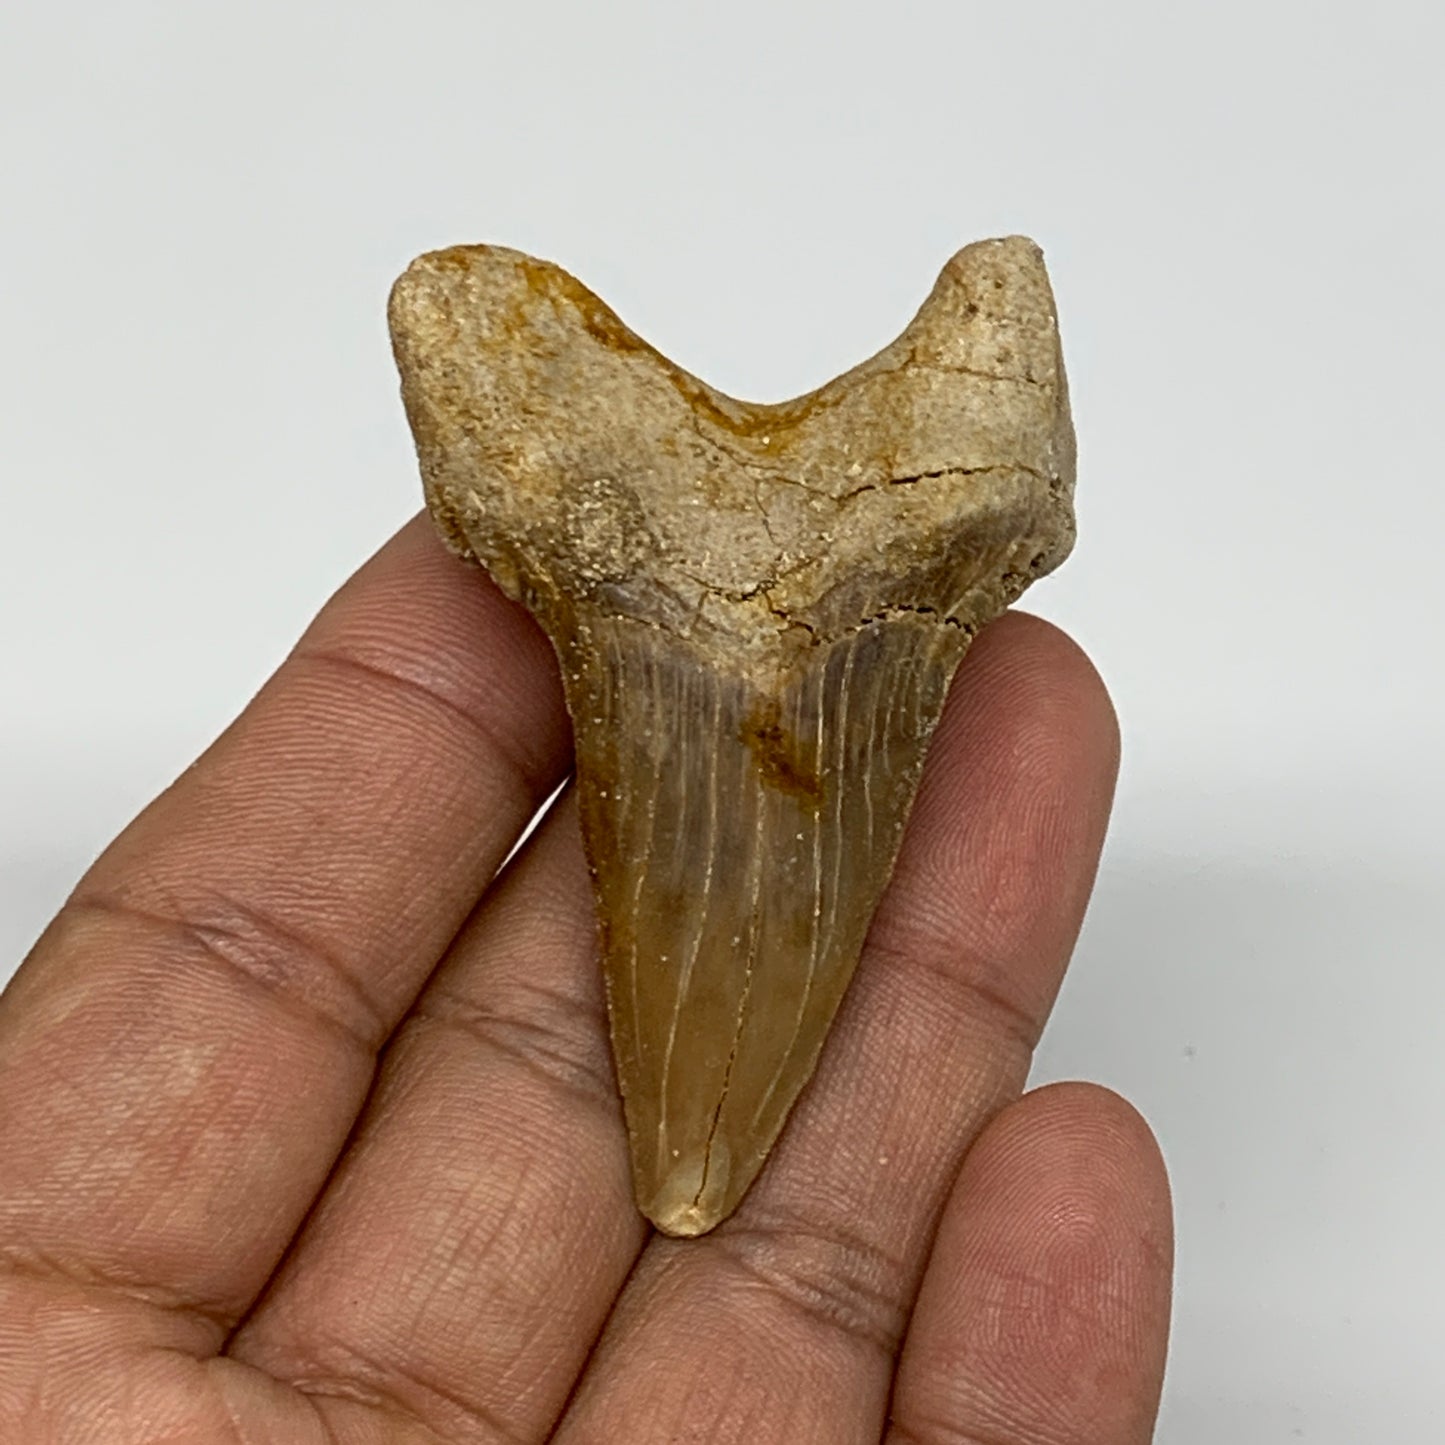 28.8g, 2.2"X 1.5"x 0.8" Natural Fossils Fish Shark Tooth @Morocco, B12694